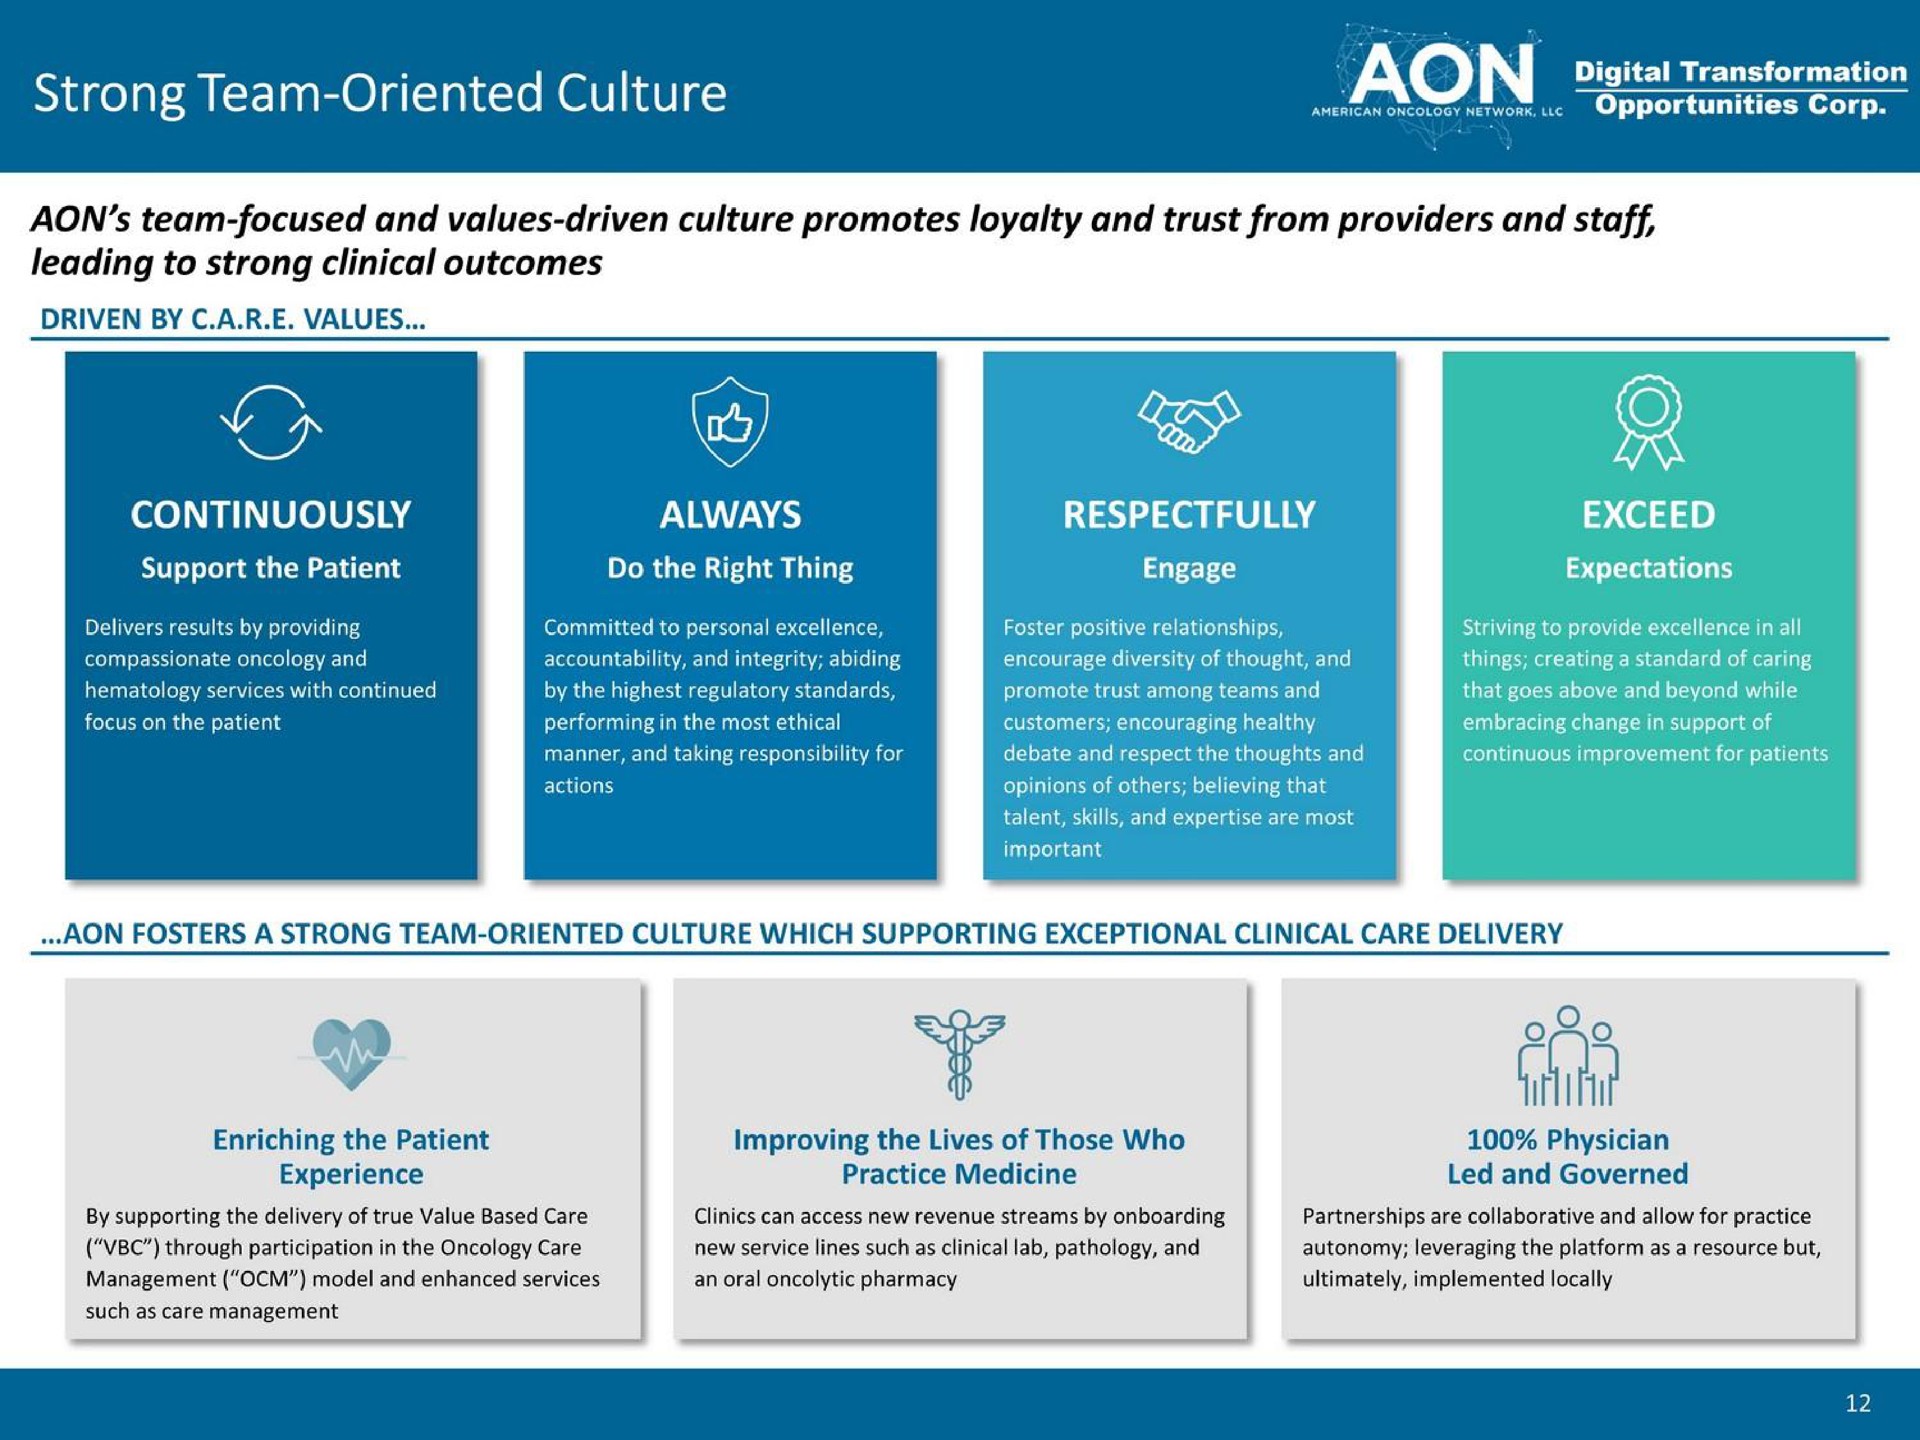 strong team oriented culture pee continuously team focused and values driven culture promotes loyalty and trust from providers and staff leading to strong clinical outcomes driven by a values respectfully always exceed as i | American Oncology Network